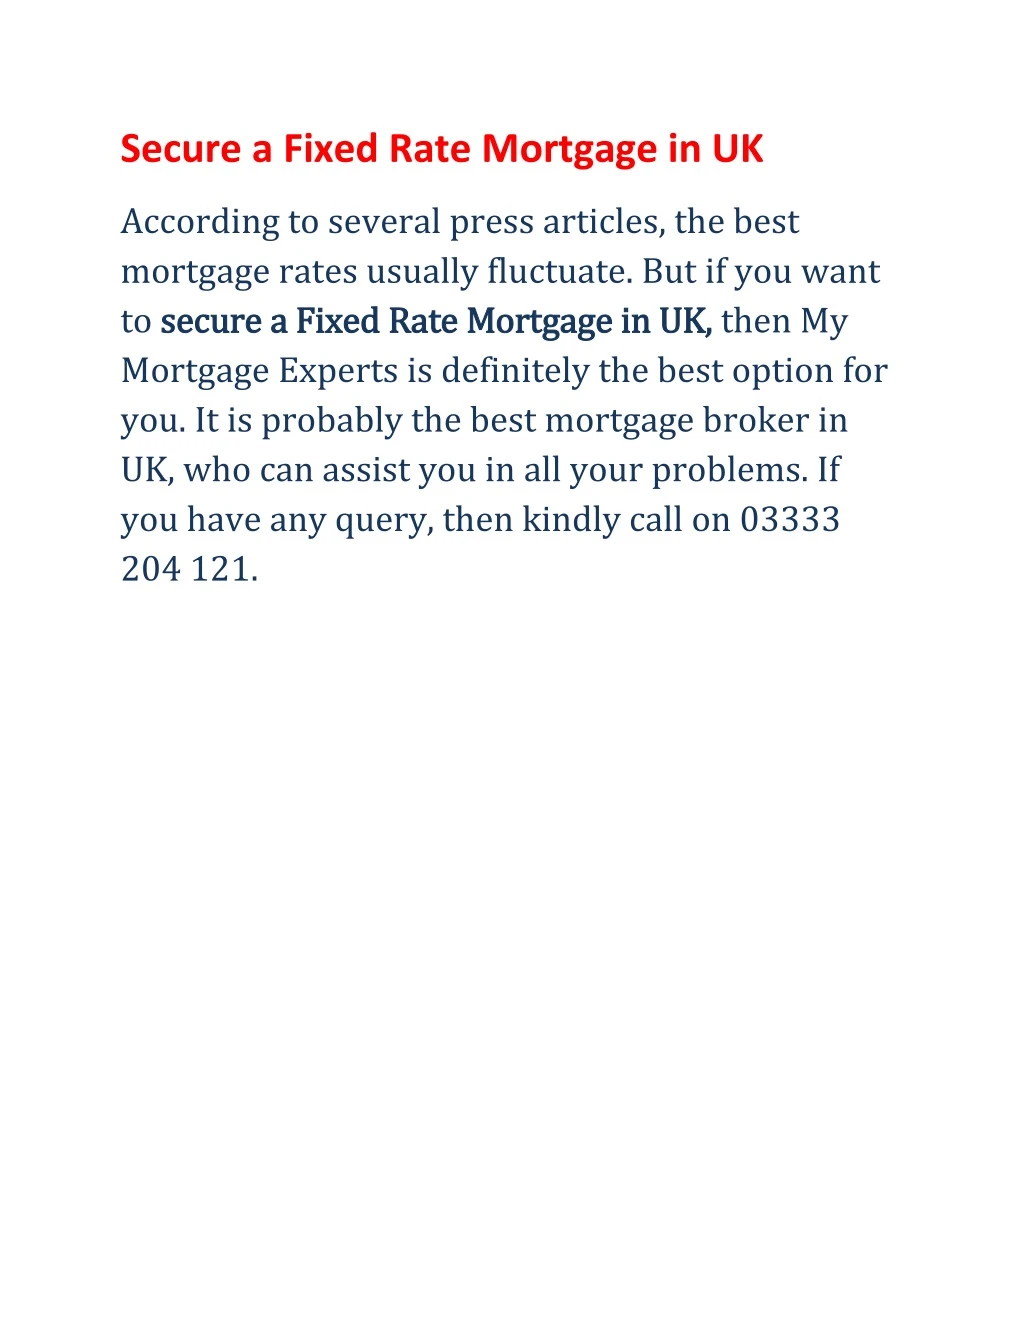 secure a fixed rate mortgage in uk